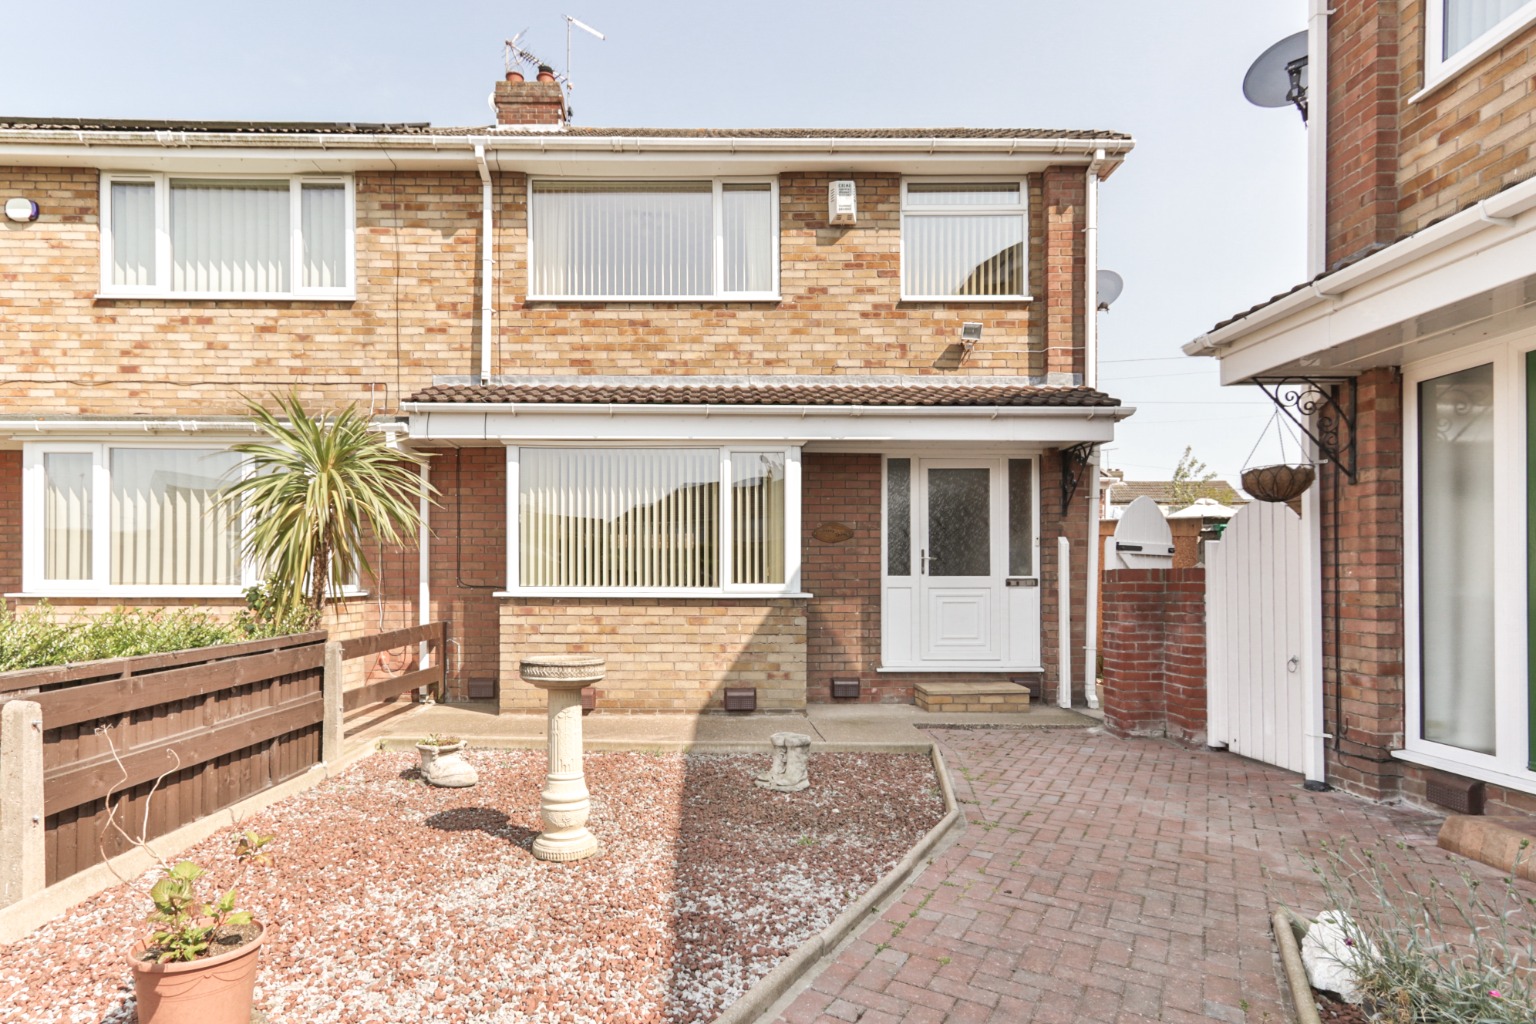 3 bed semi-detached house for sale in Coverdale, Hull - Property Image 1